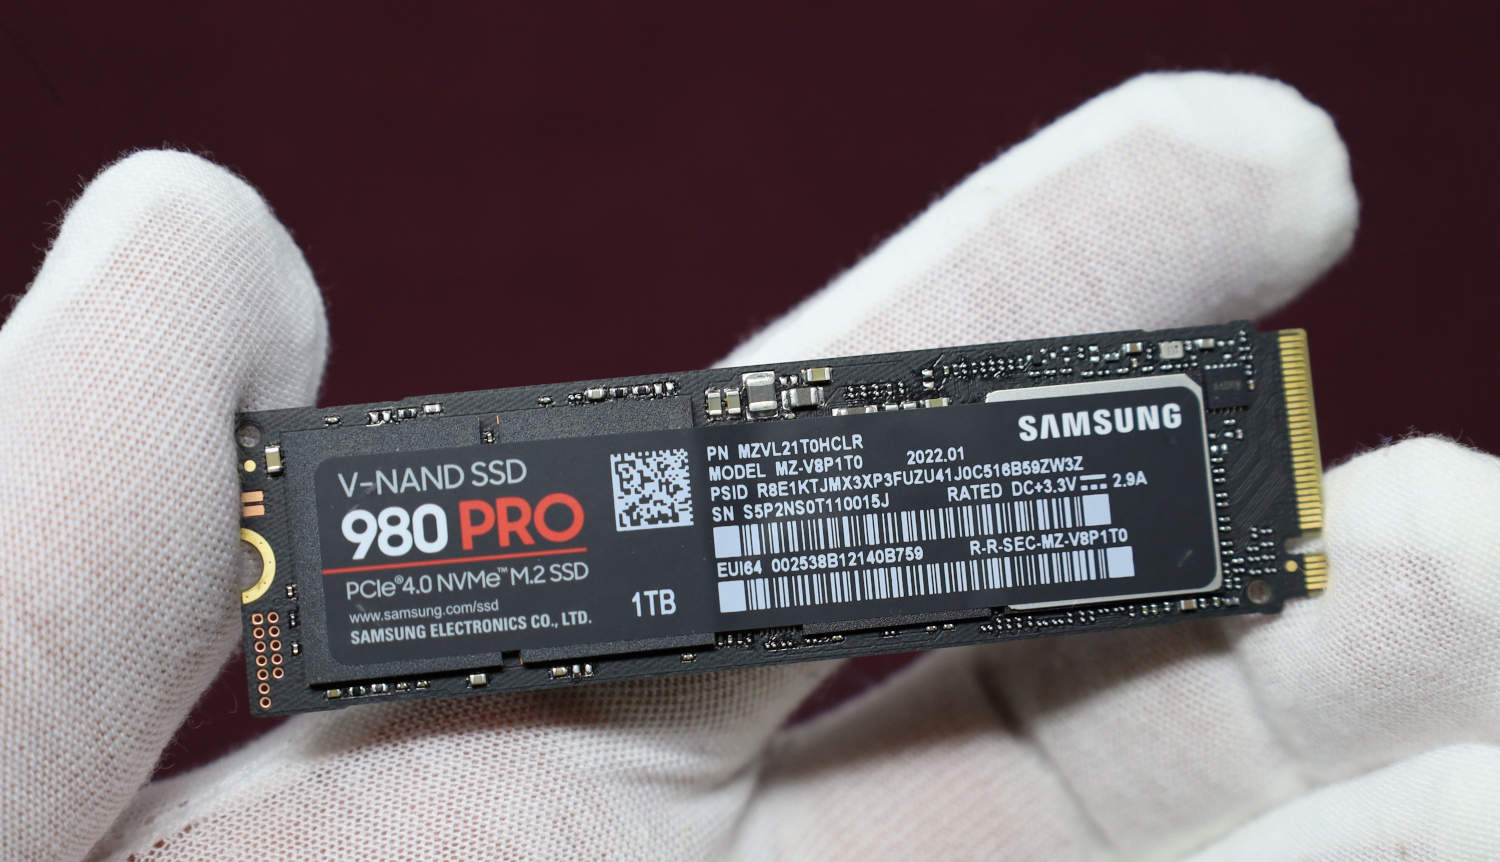 Samsung SSD 980 PRO 1TB Review